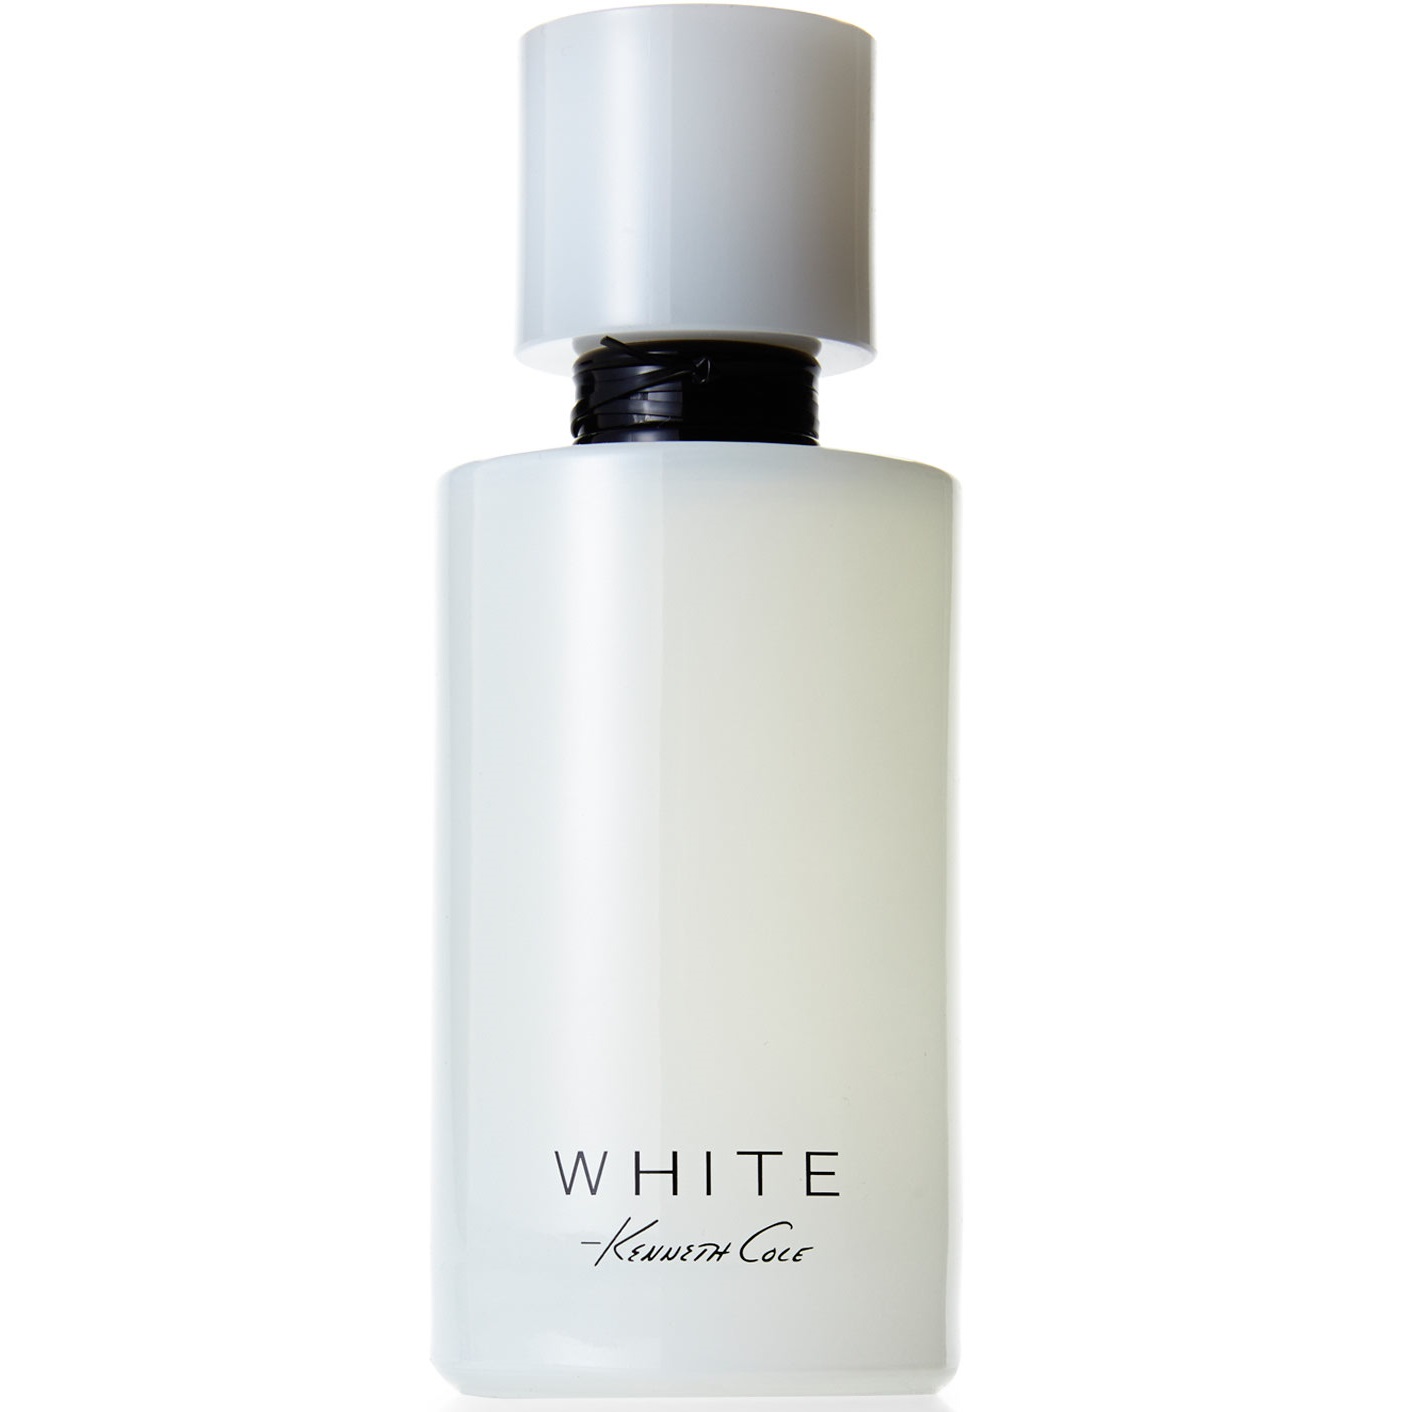 Kenneth Cole - White (2мл)